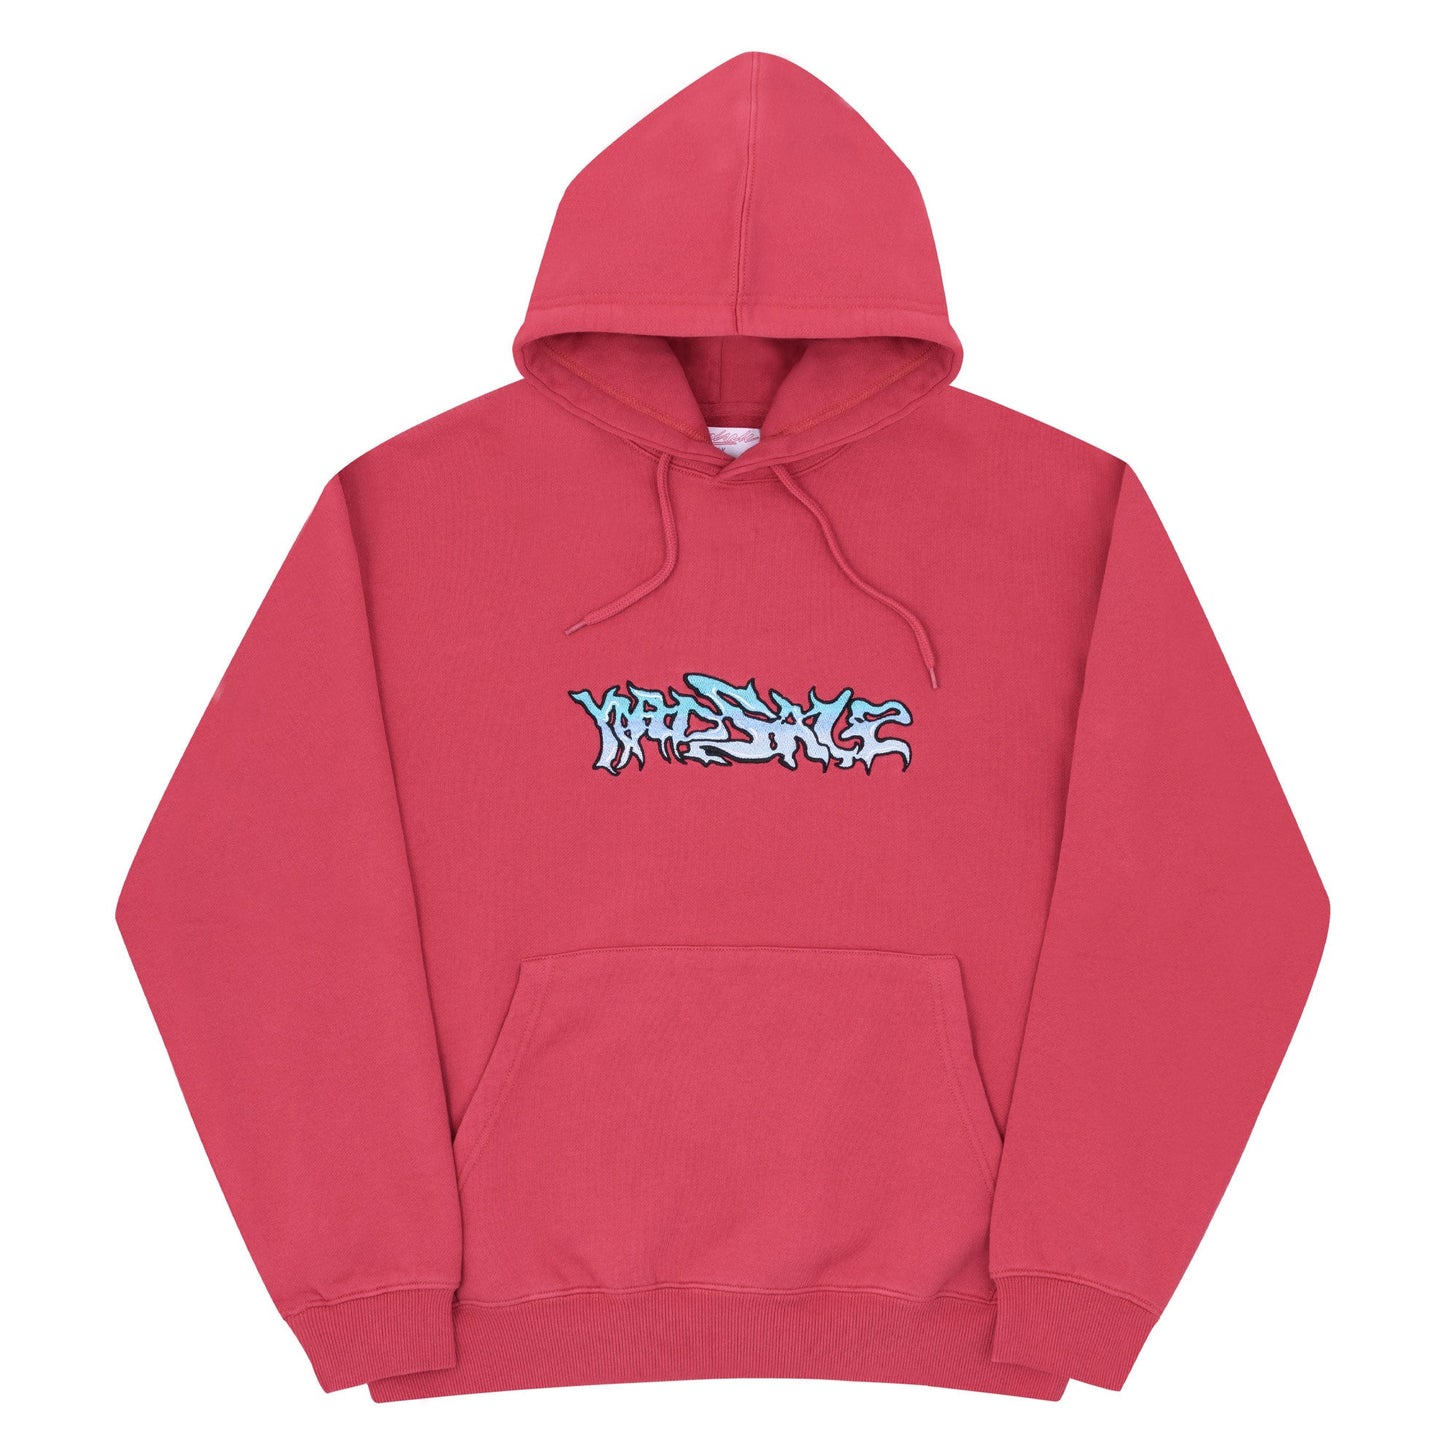 Dreamscape Hood (Washed Pink)